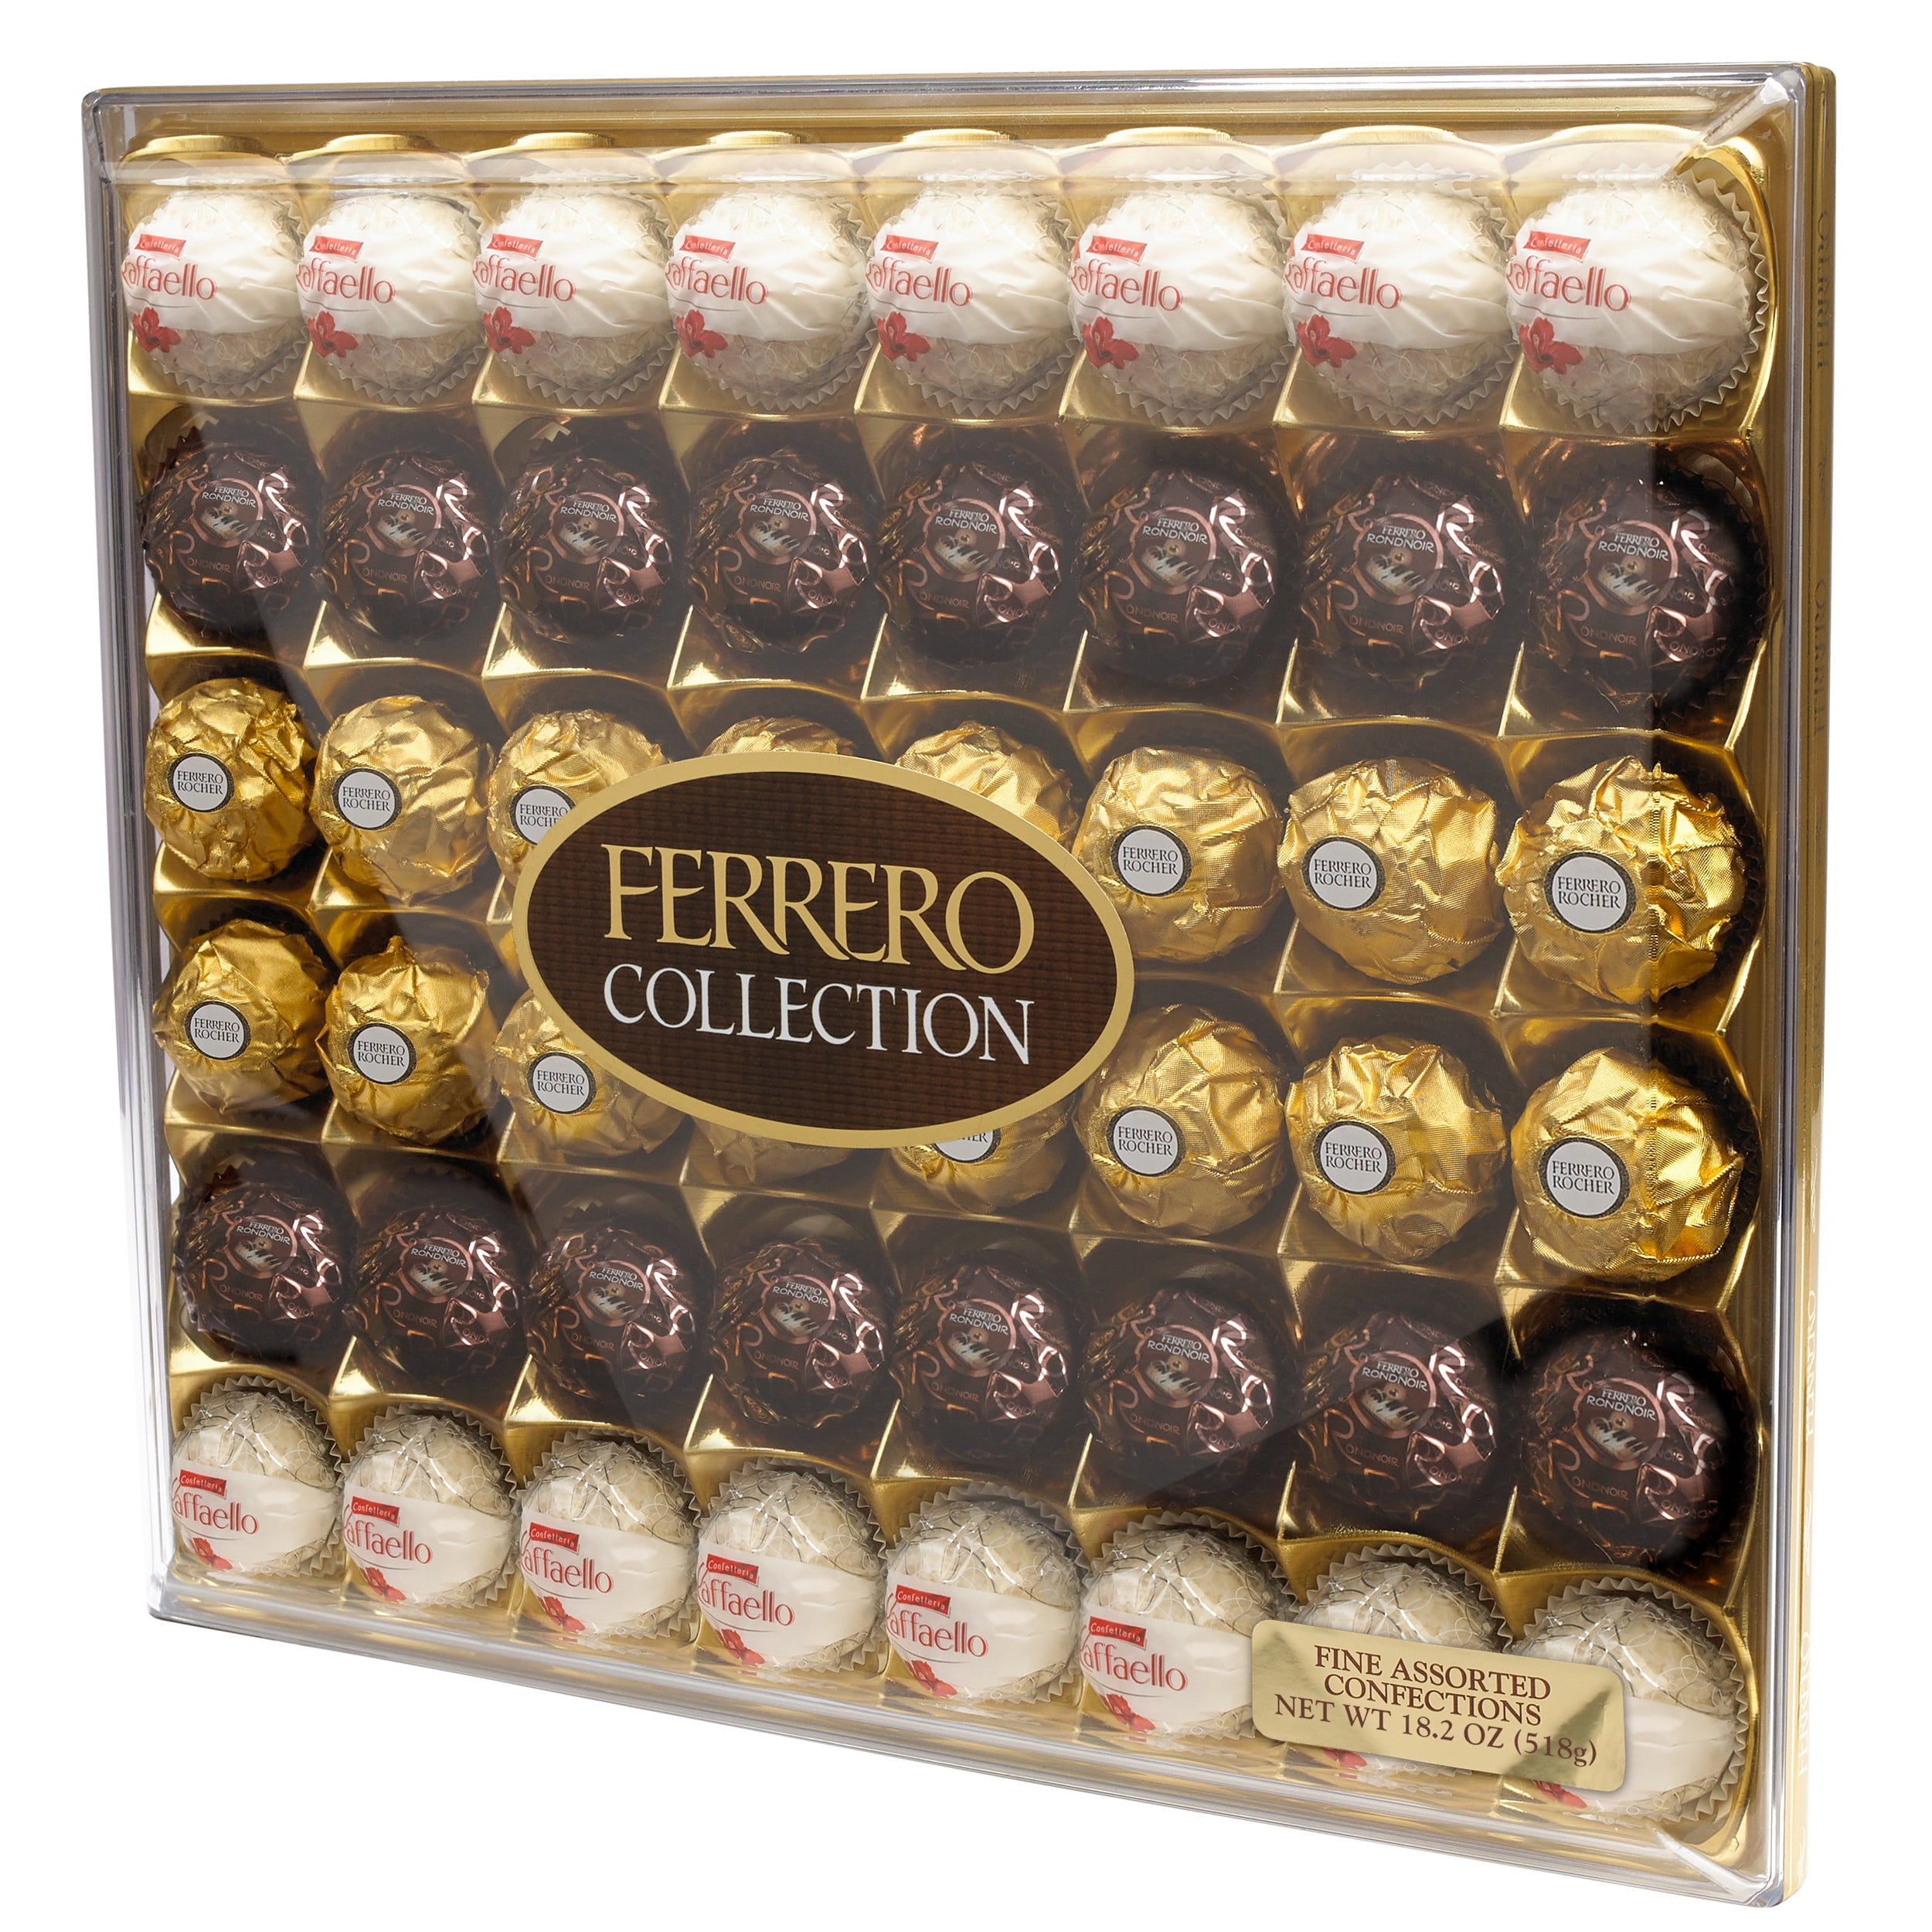 Collection oz Coconut, Assorted Chocolate, 48 Hazelnut Ferrero and Gourmet Premium Easter A Chocolate 18.2 Dark Count) Milk Great Gift,